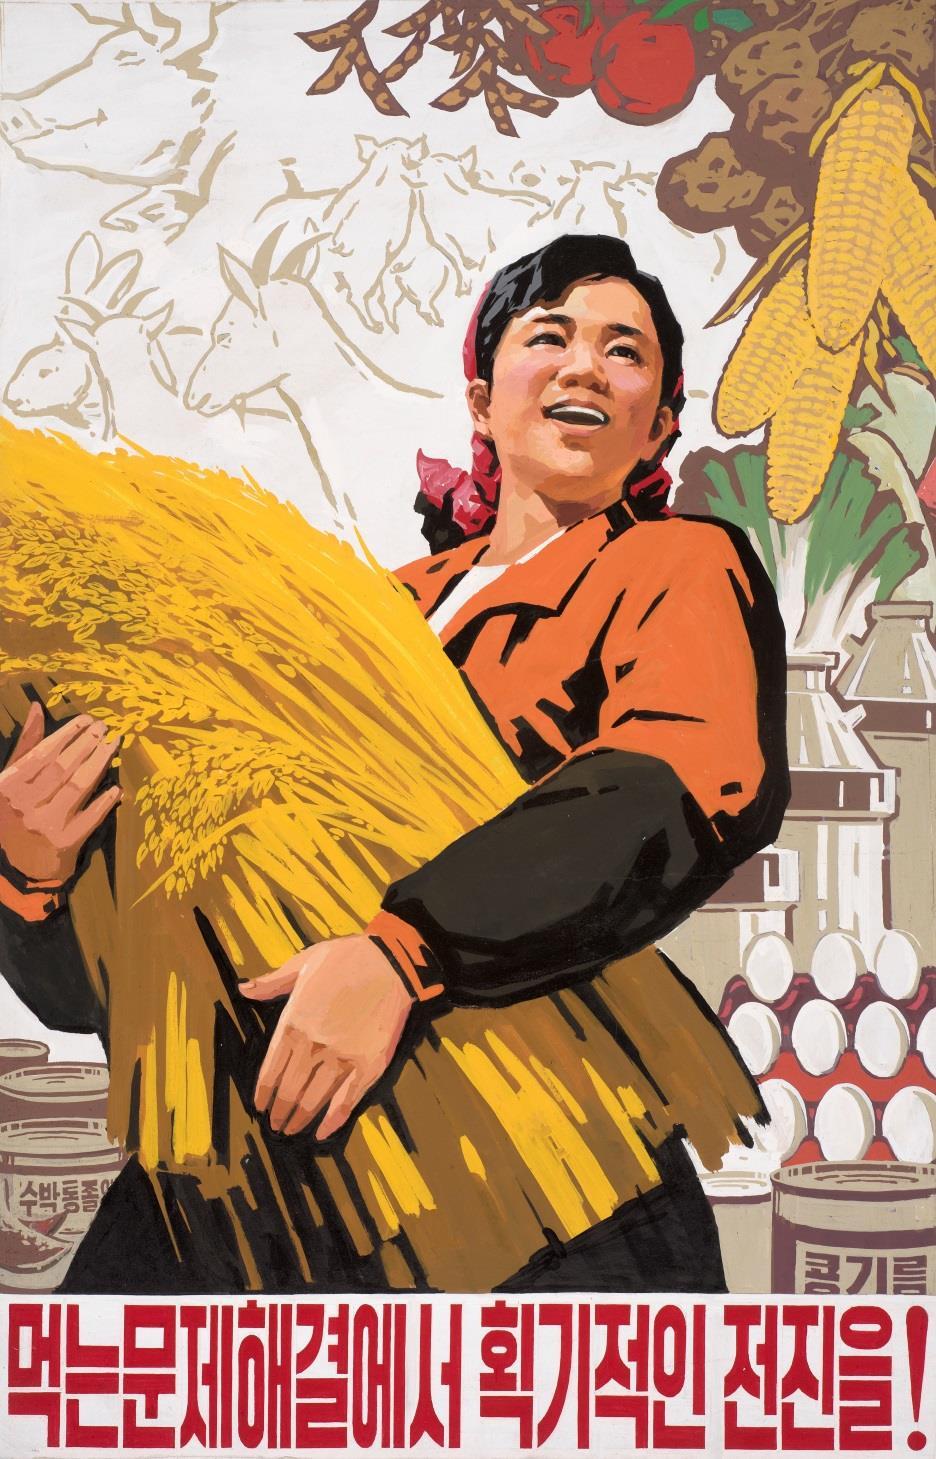 Made in North Korea: Everyday Graphics from the DPRK gives an extraordinary and rare insight into everyday life in the Democratic People s Republic of